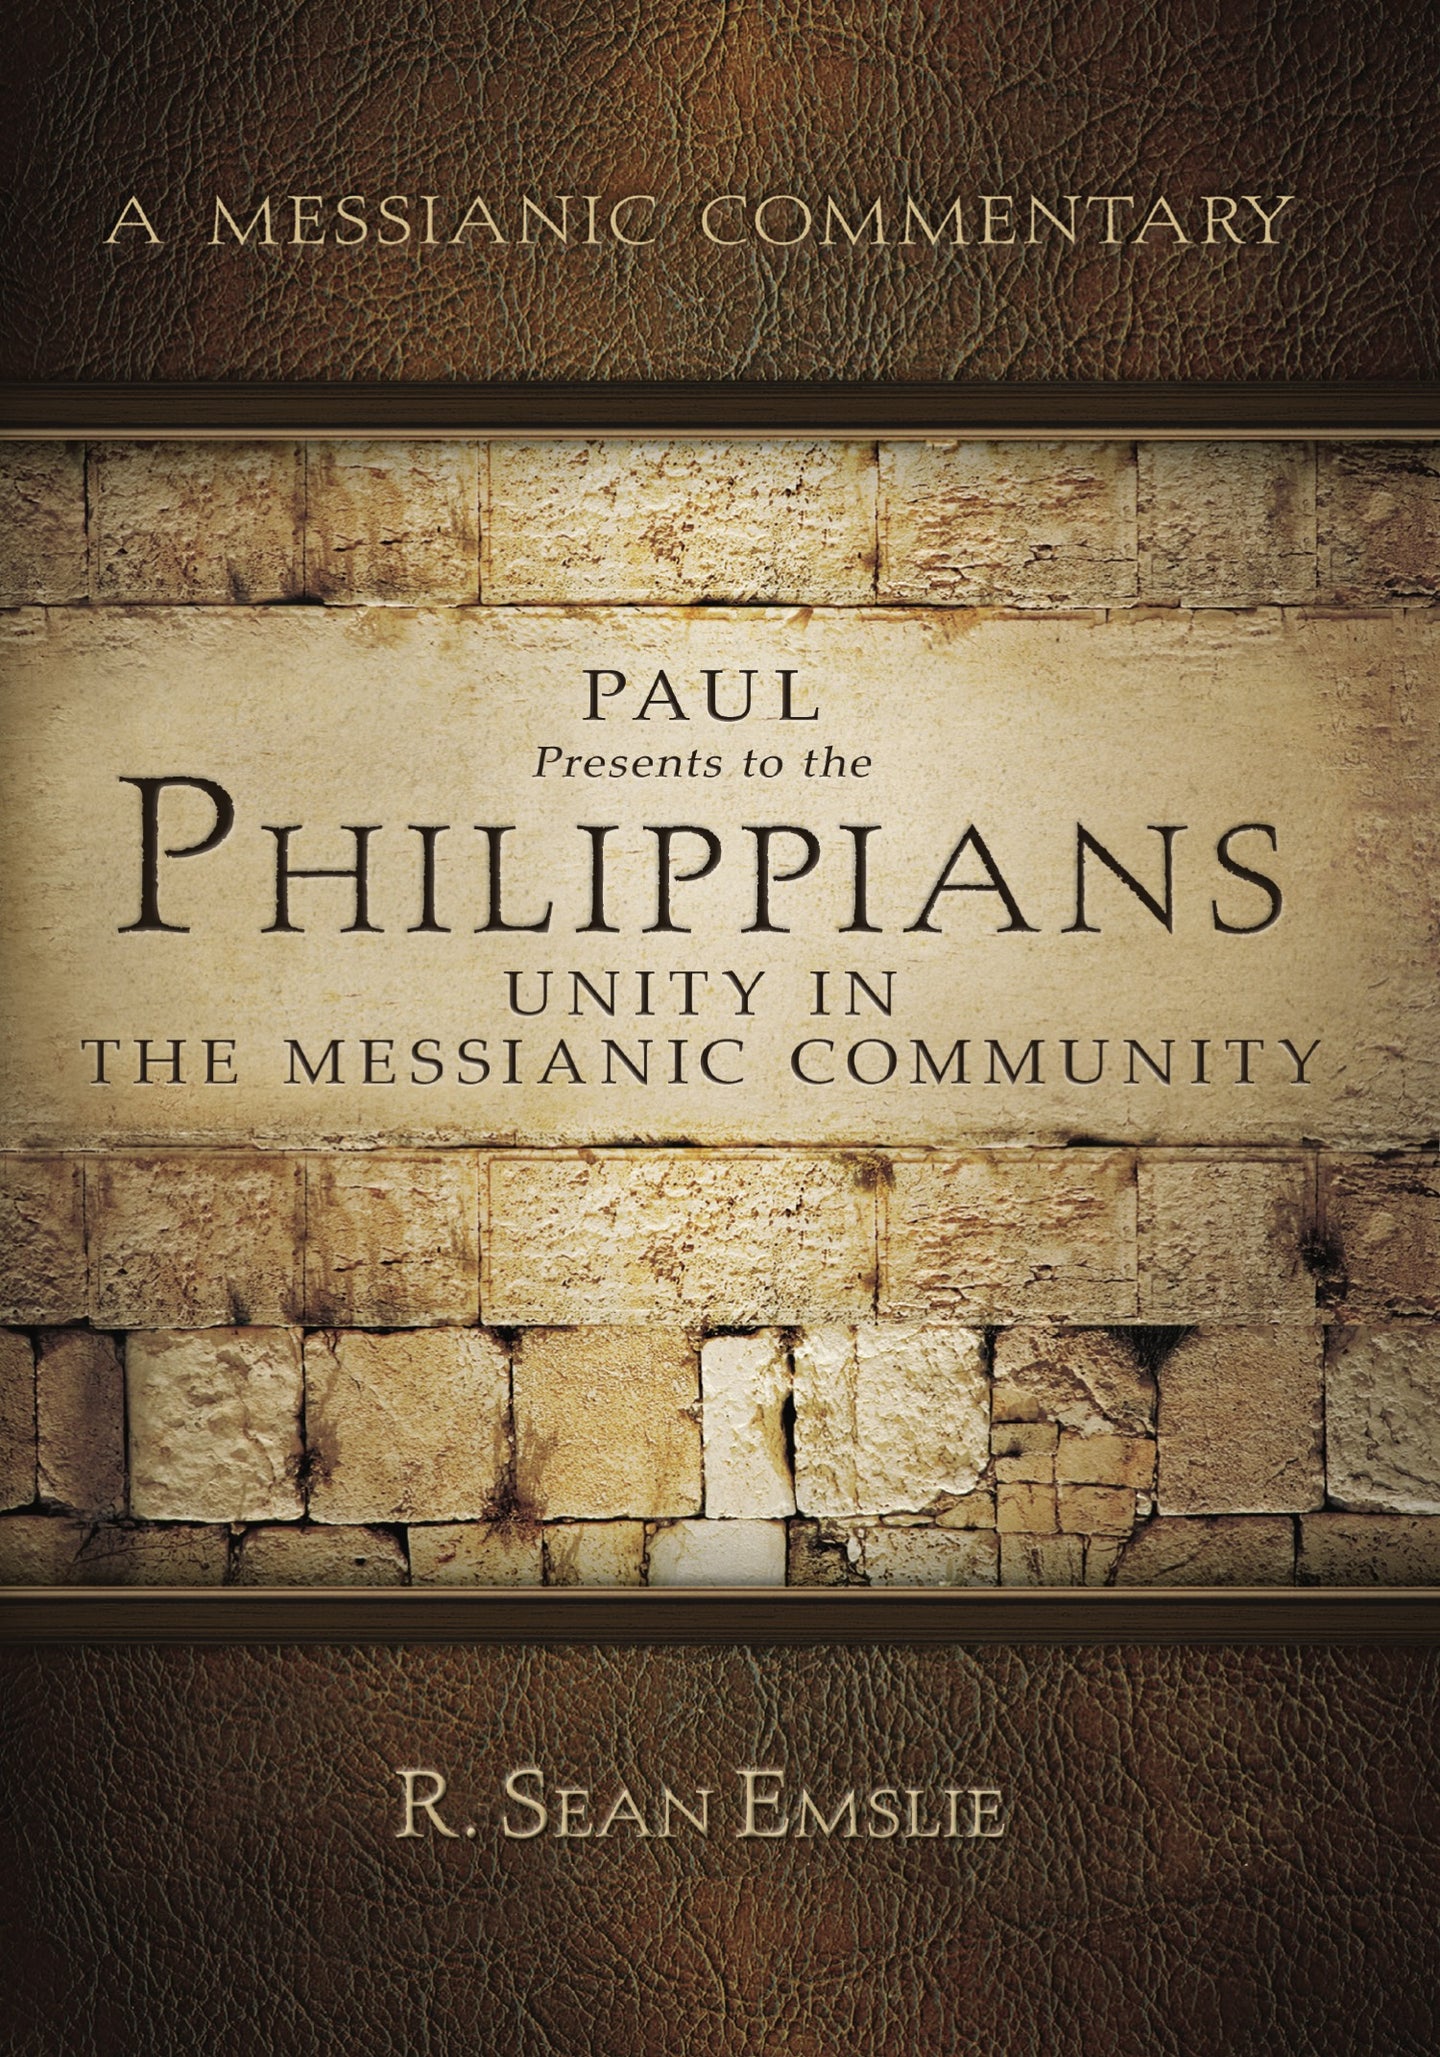 A Messianic Commentary - Paul Presents to the Philippians Unity In The Messianic Community by R. Sean Emslie